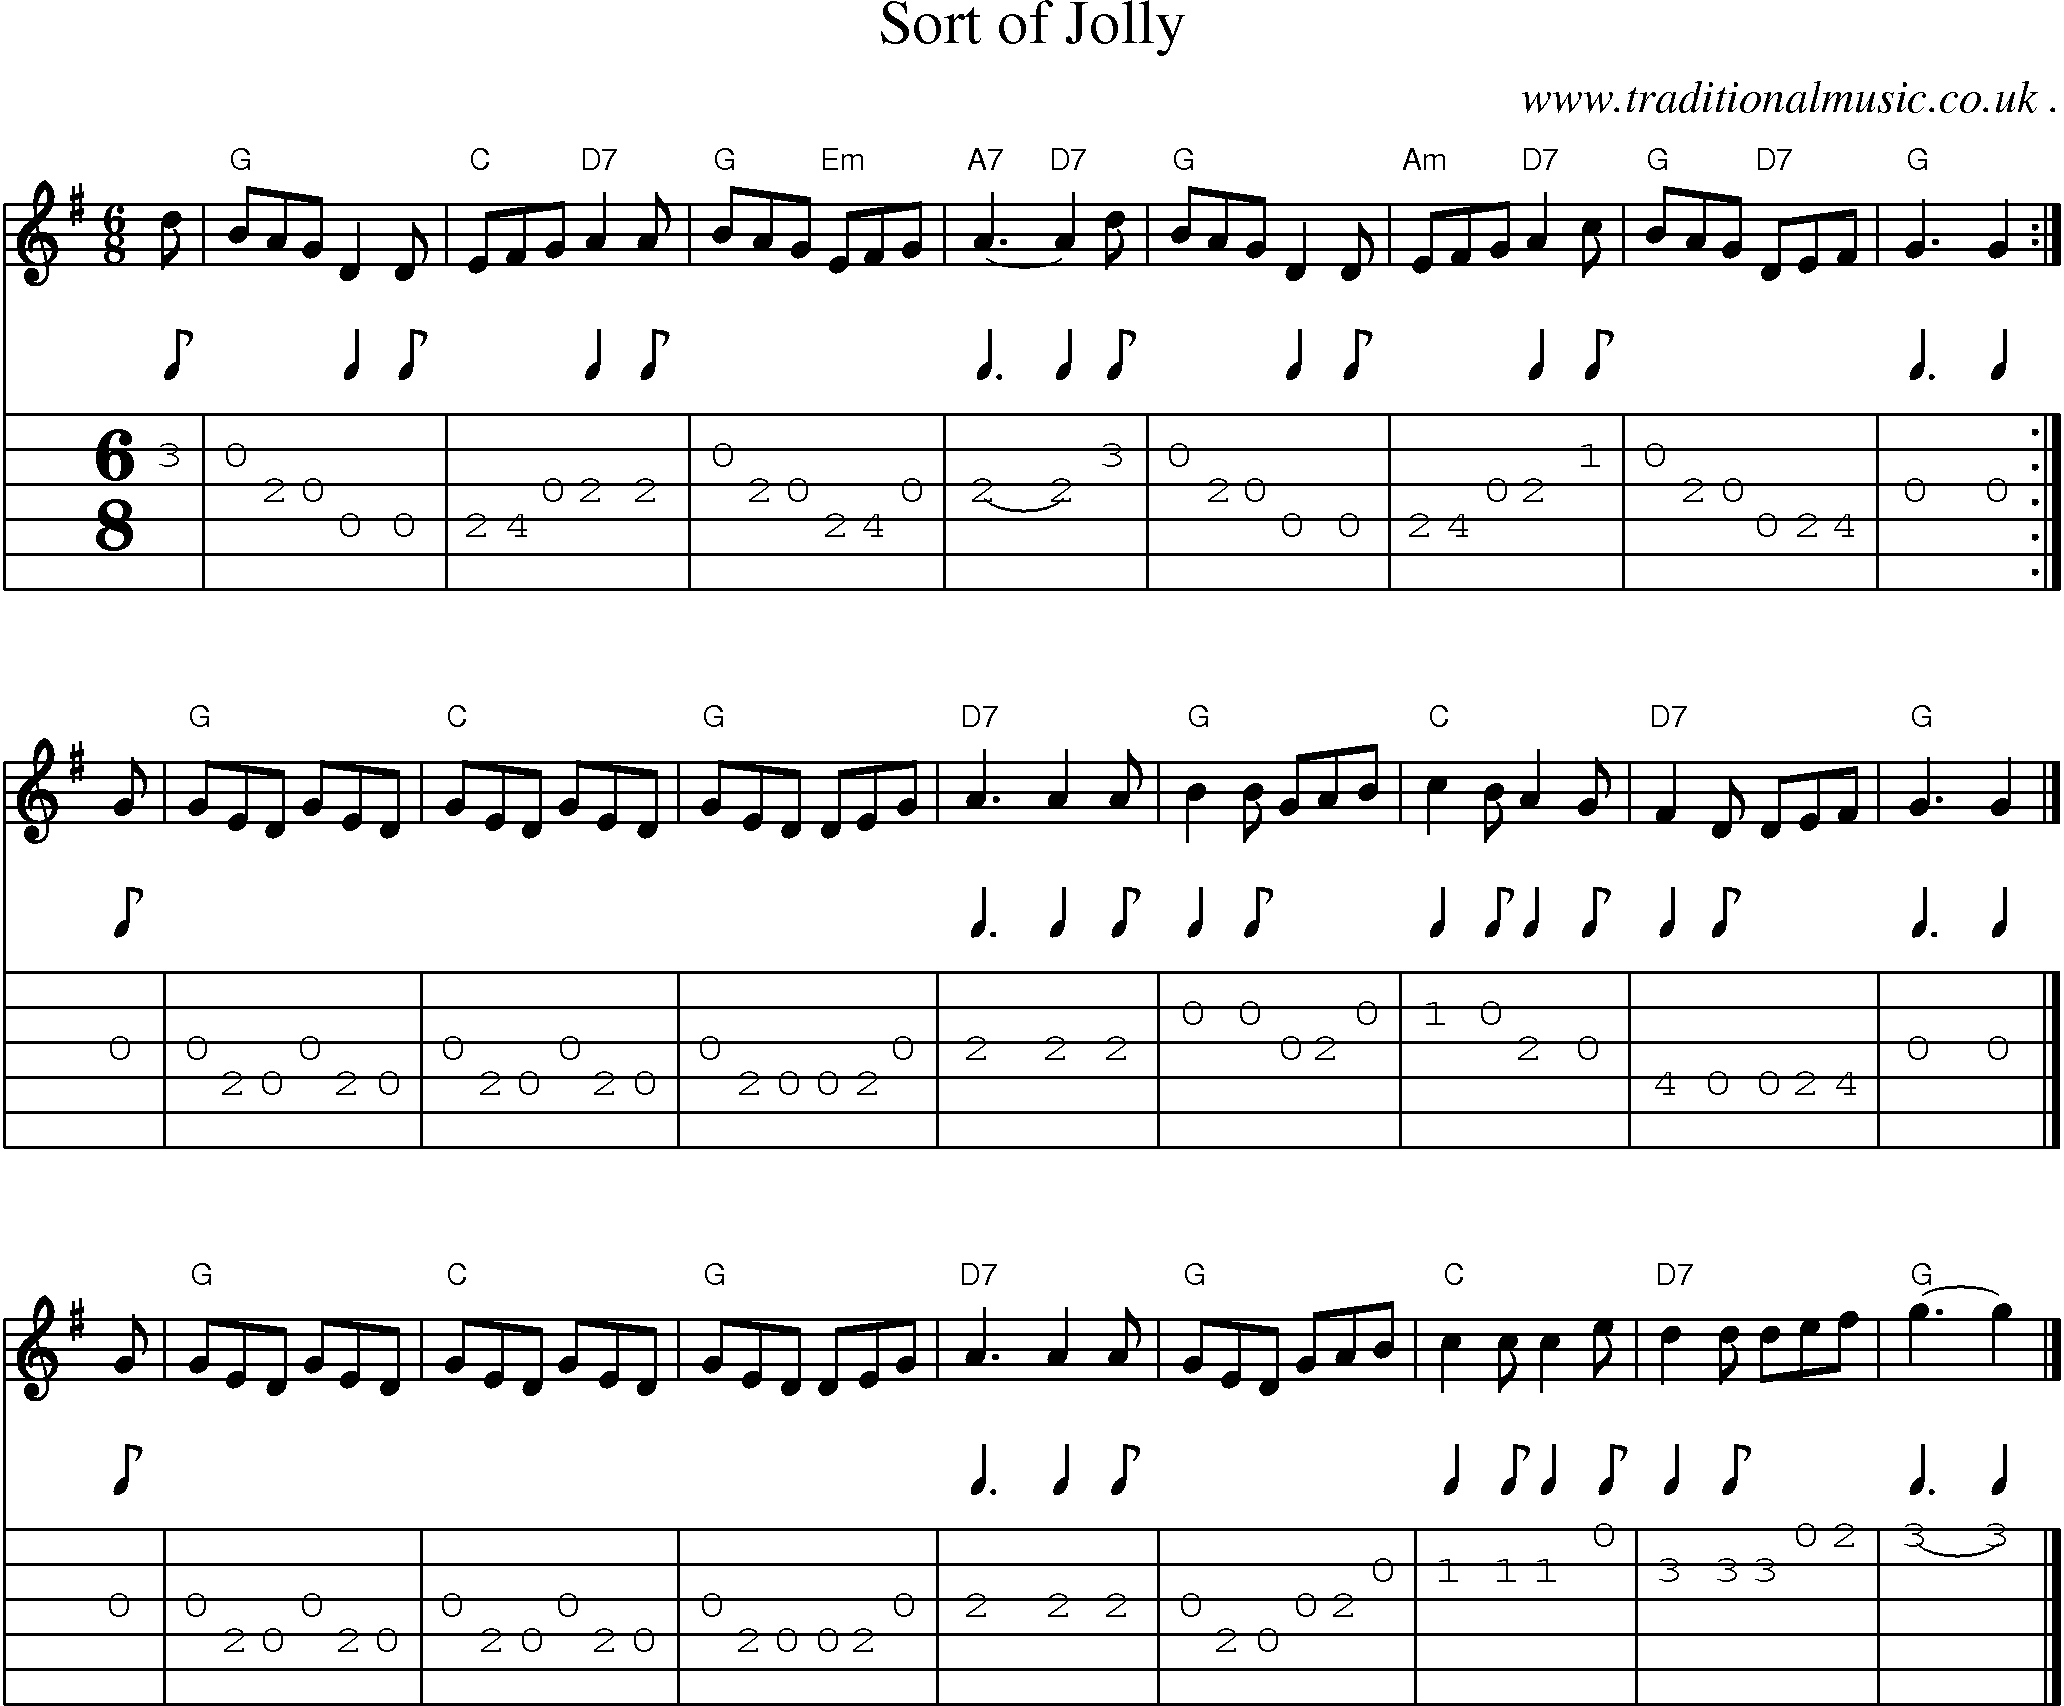 Sheet-music  score, Chords and Guitar Tabs for Sort Of Jolly